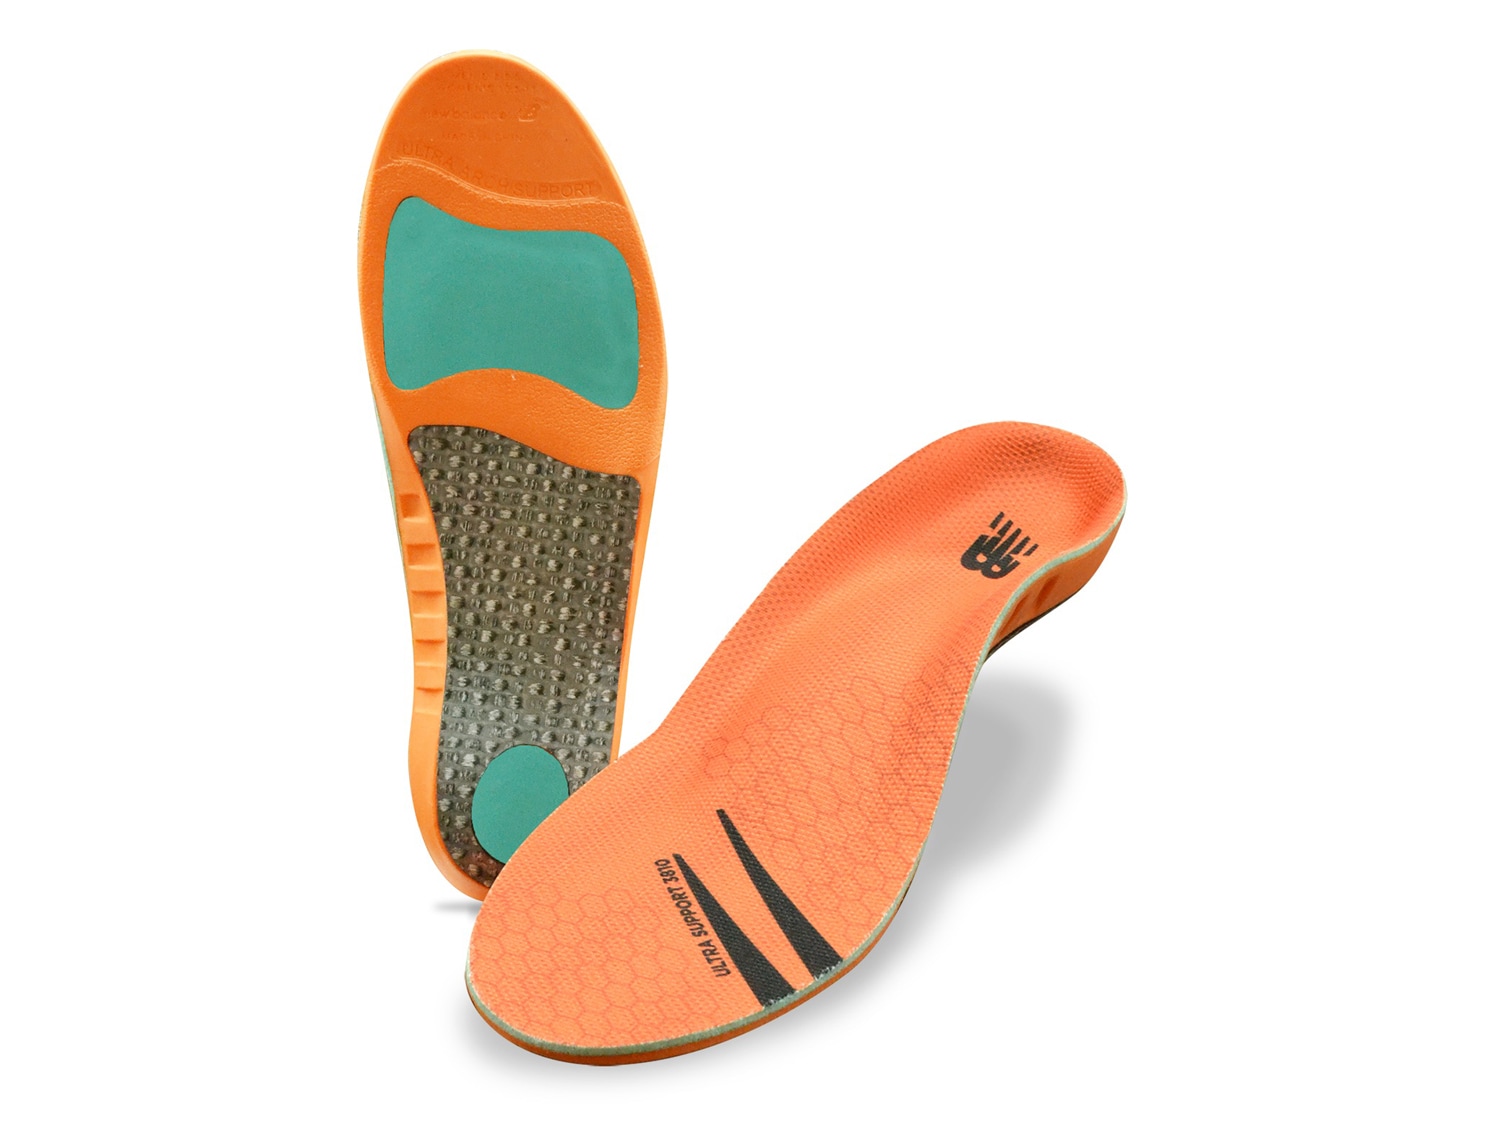 new balance metatarsal support insoles